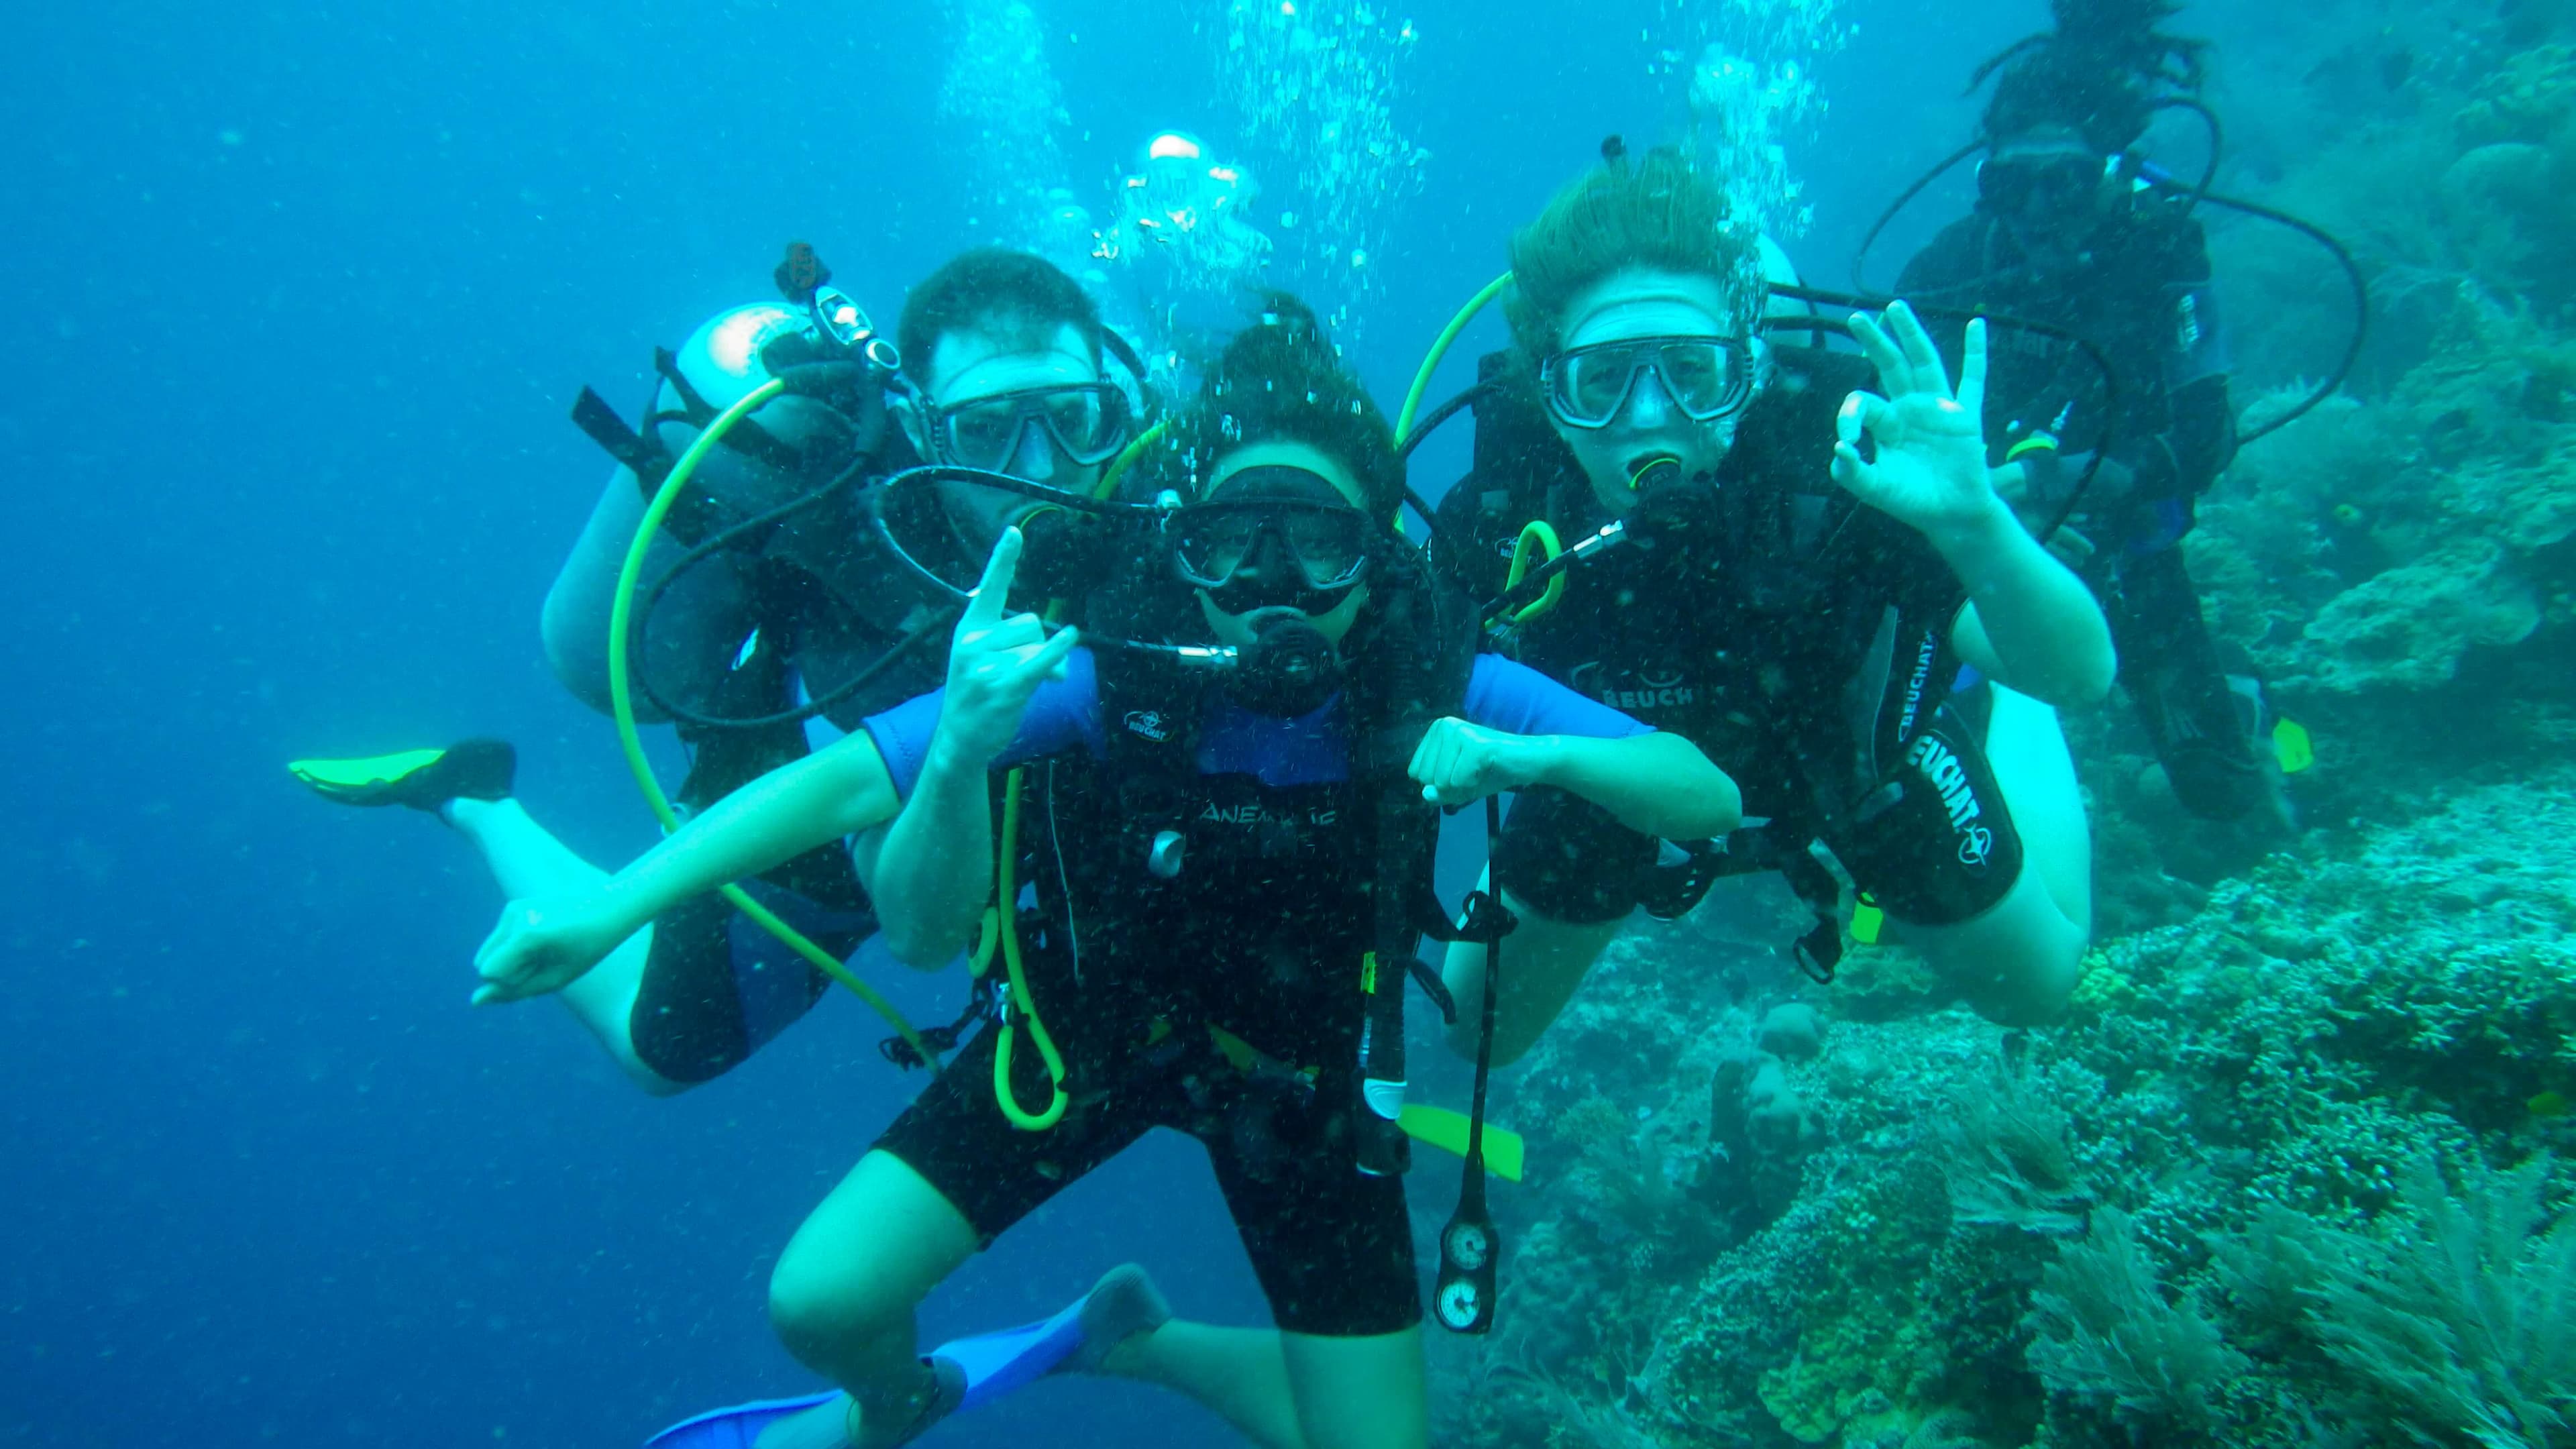 A divers group enjoining the beauty of the underwater in Trincomalee Sri Lanka